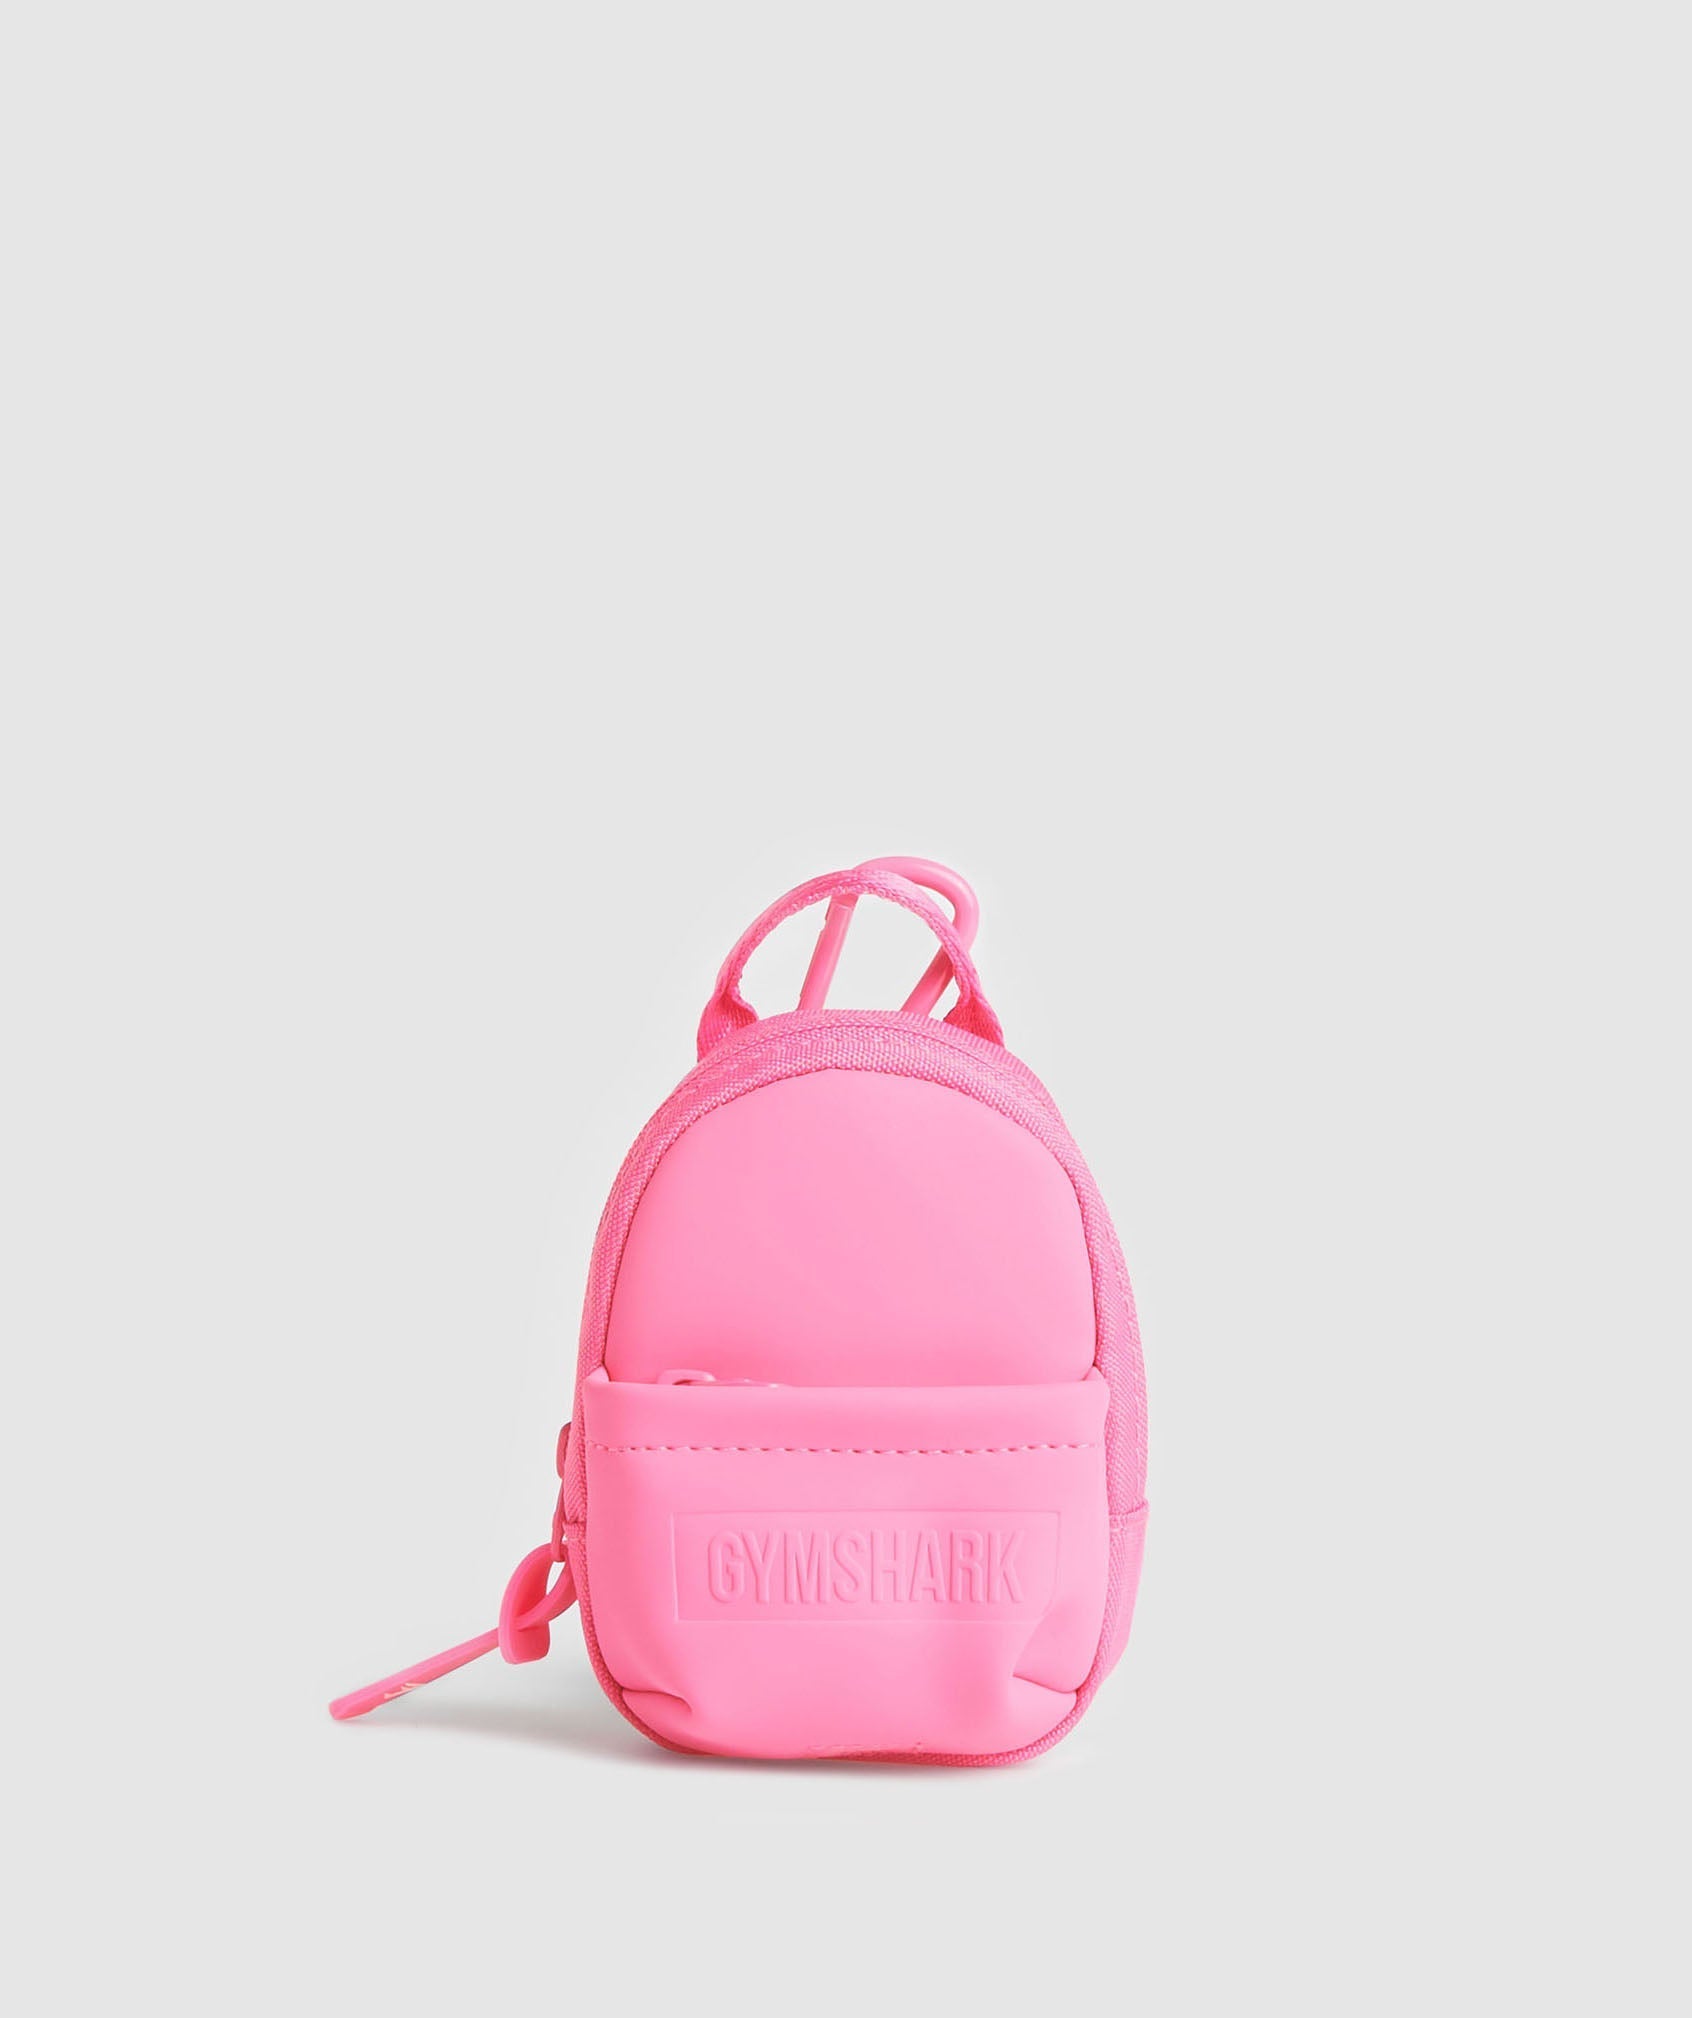 Everyday Keychain in Fetch Pink